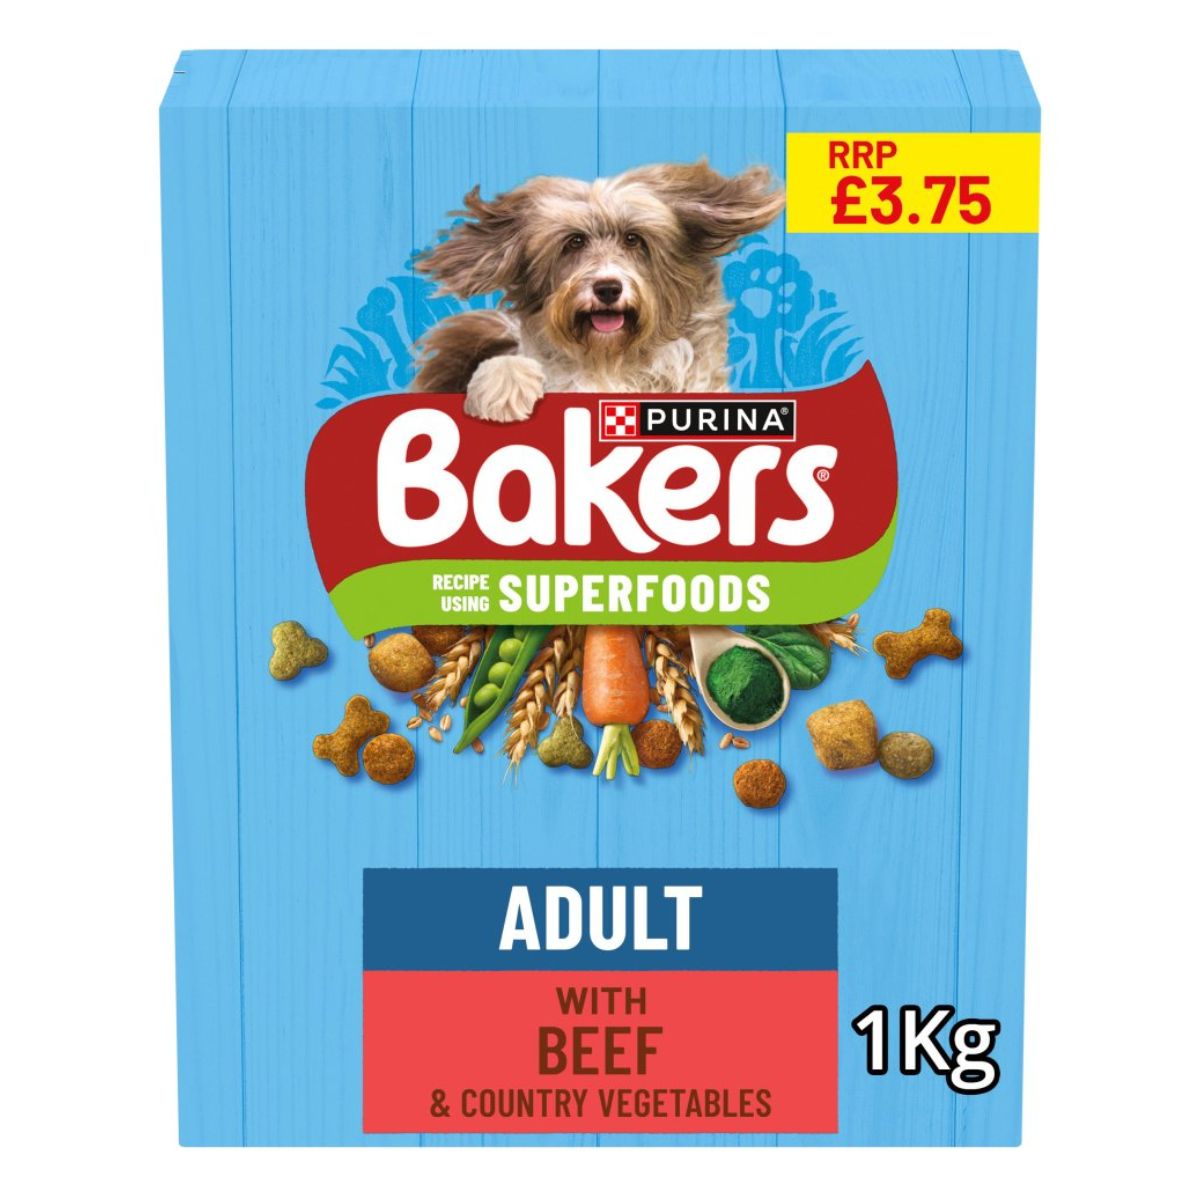 Purina - Bakers Adult with Tasty Beef & Country Vegetables - 1kg dog food.